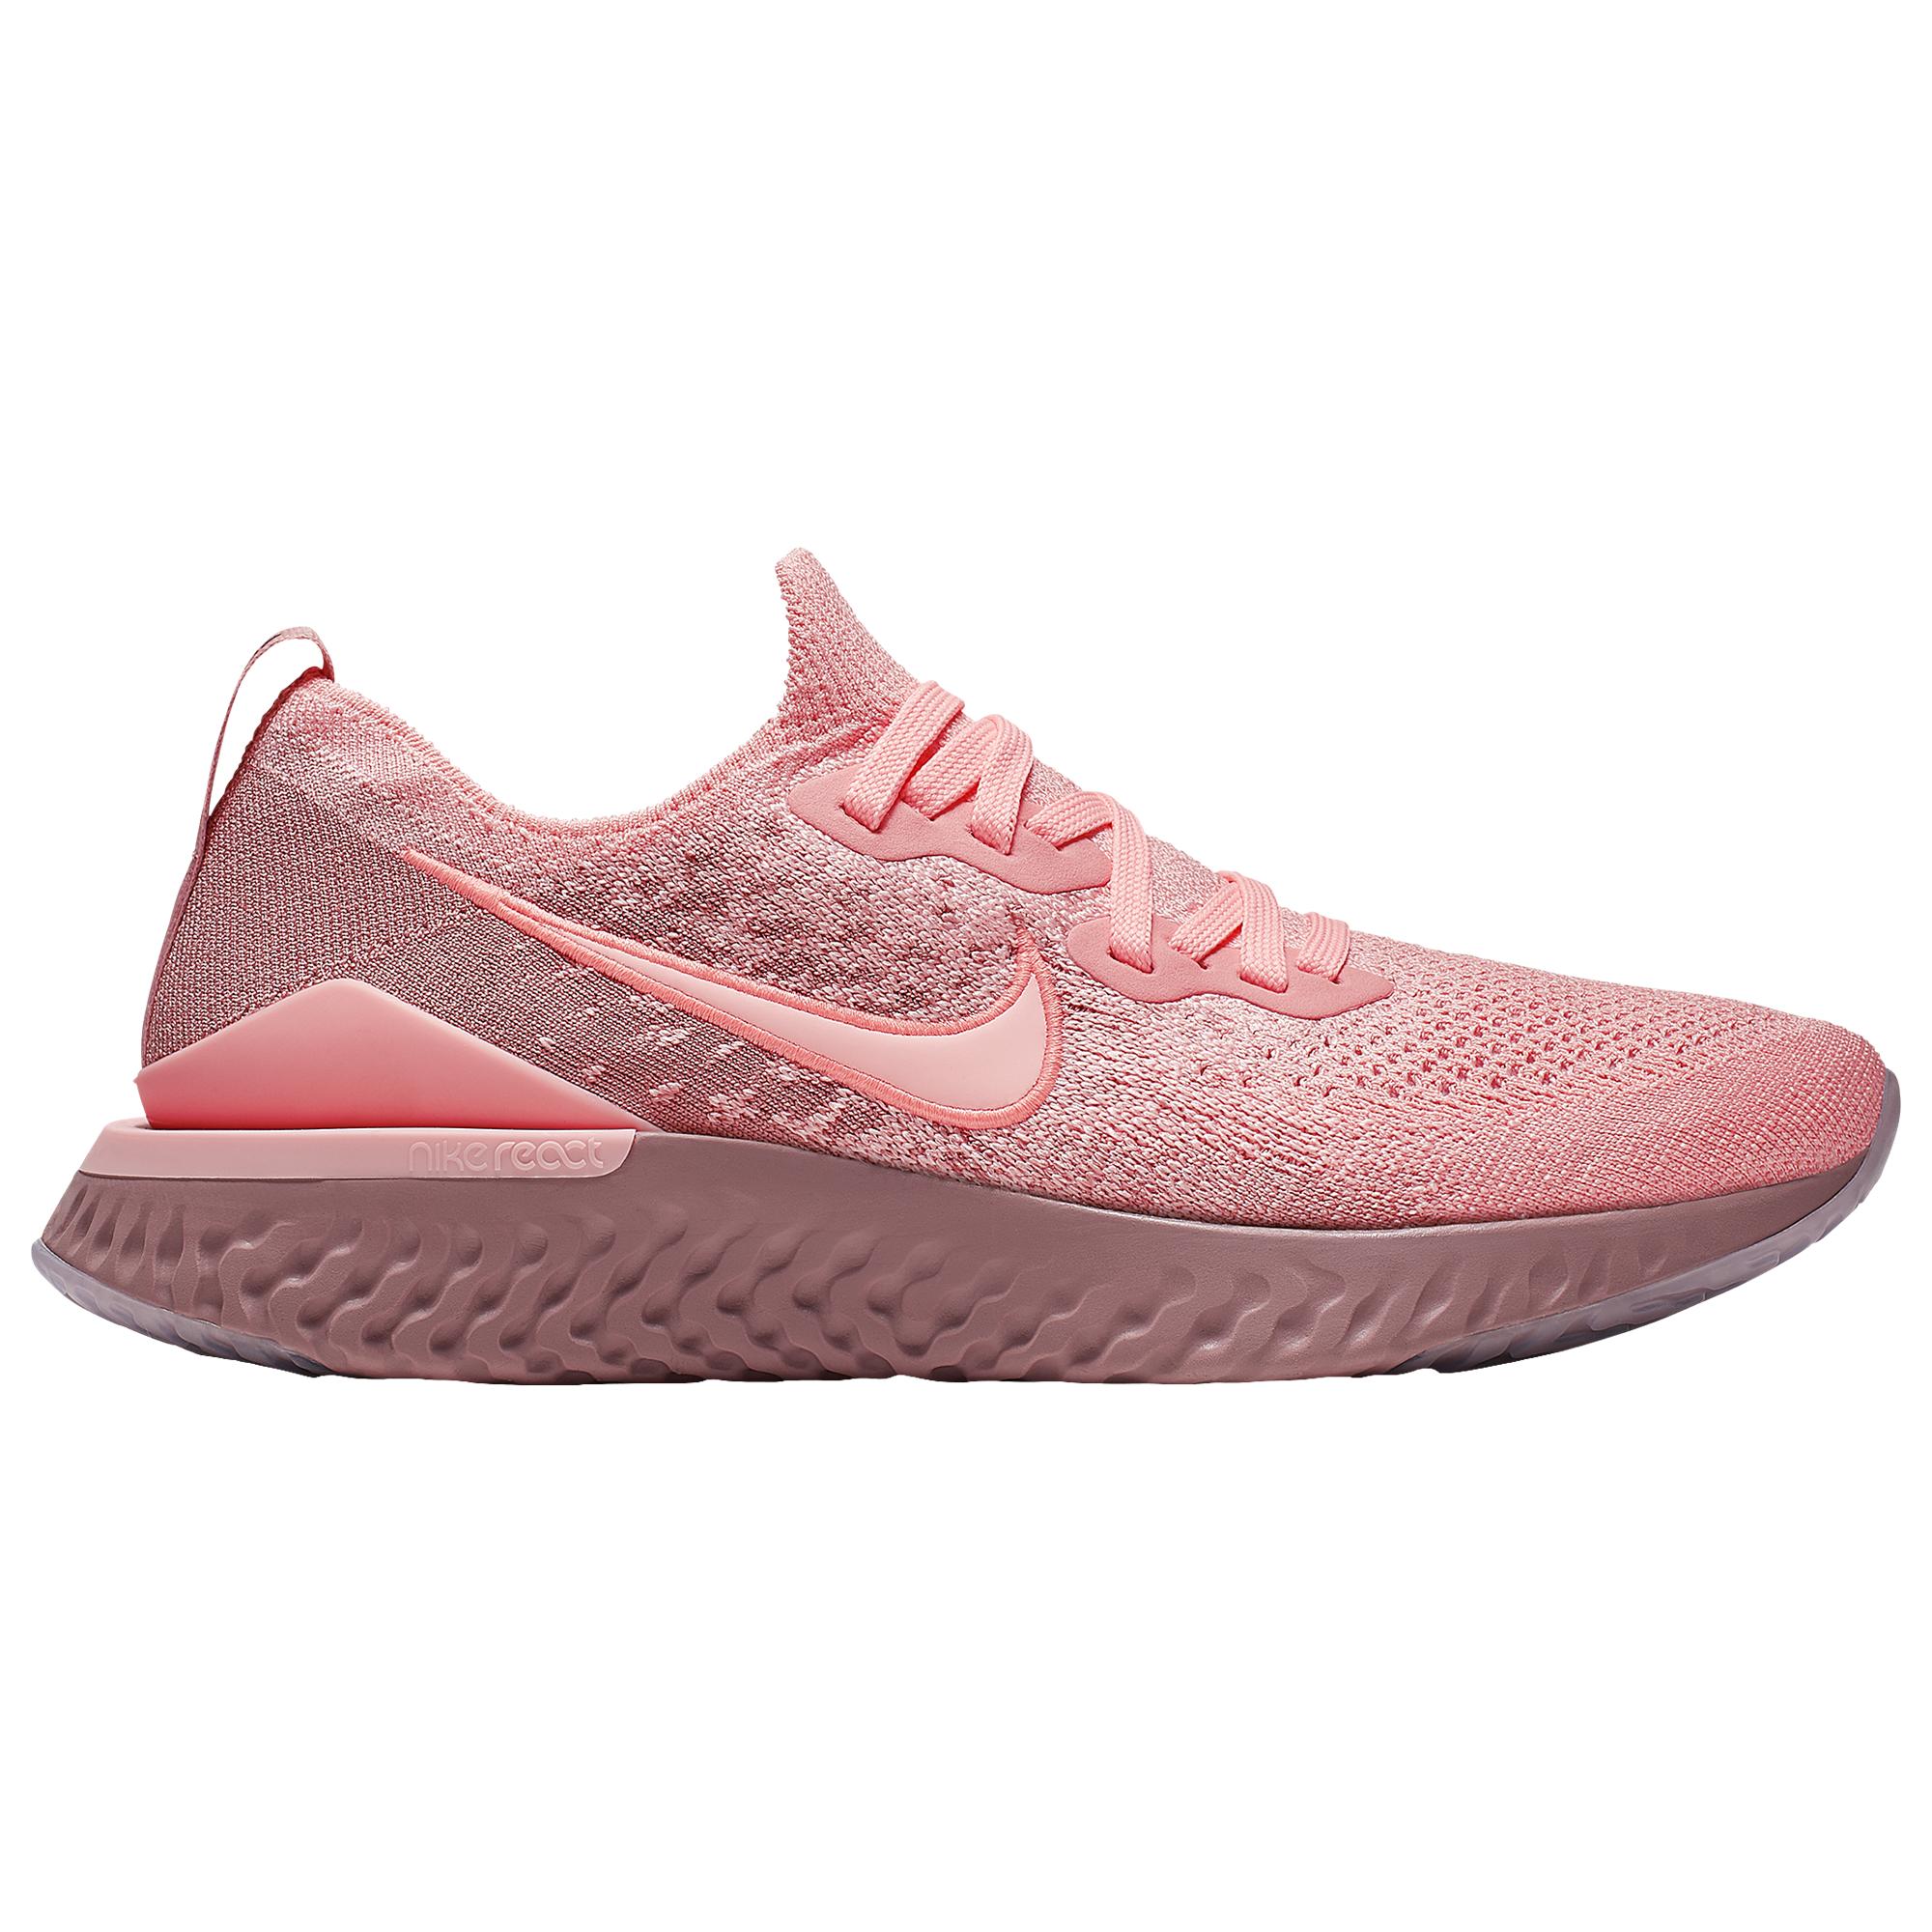 Nike Rubber Epic React Flyknit 2 Running Shoe in Pink/Pink (Pink) - Lyst